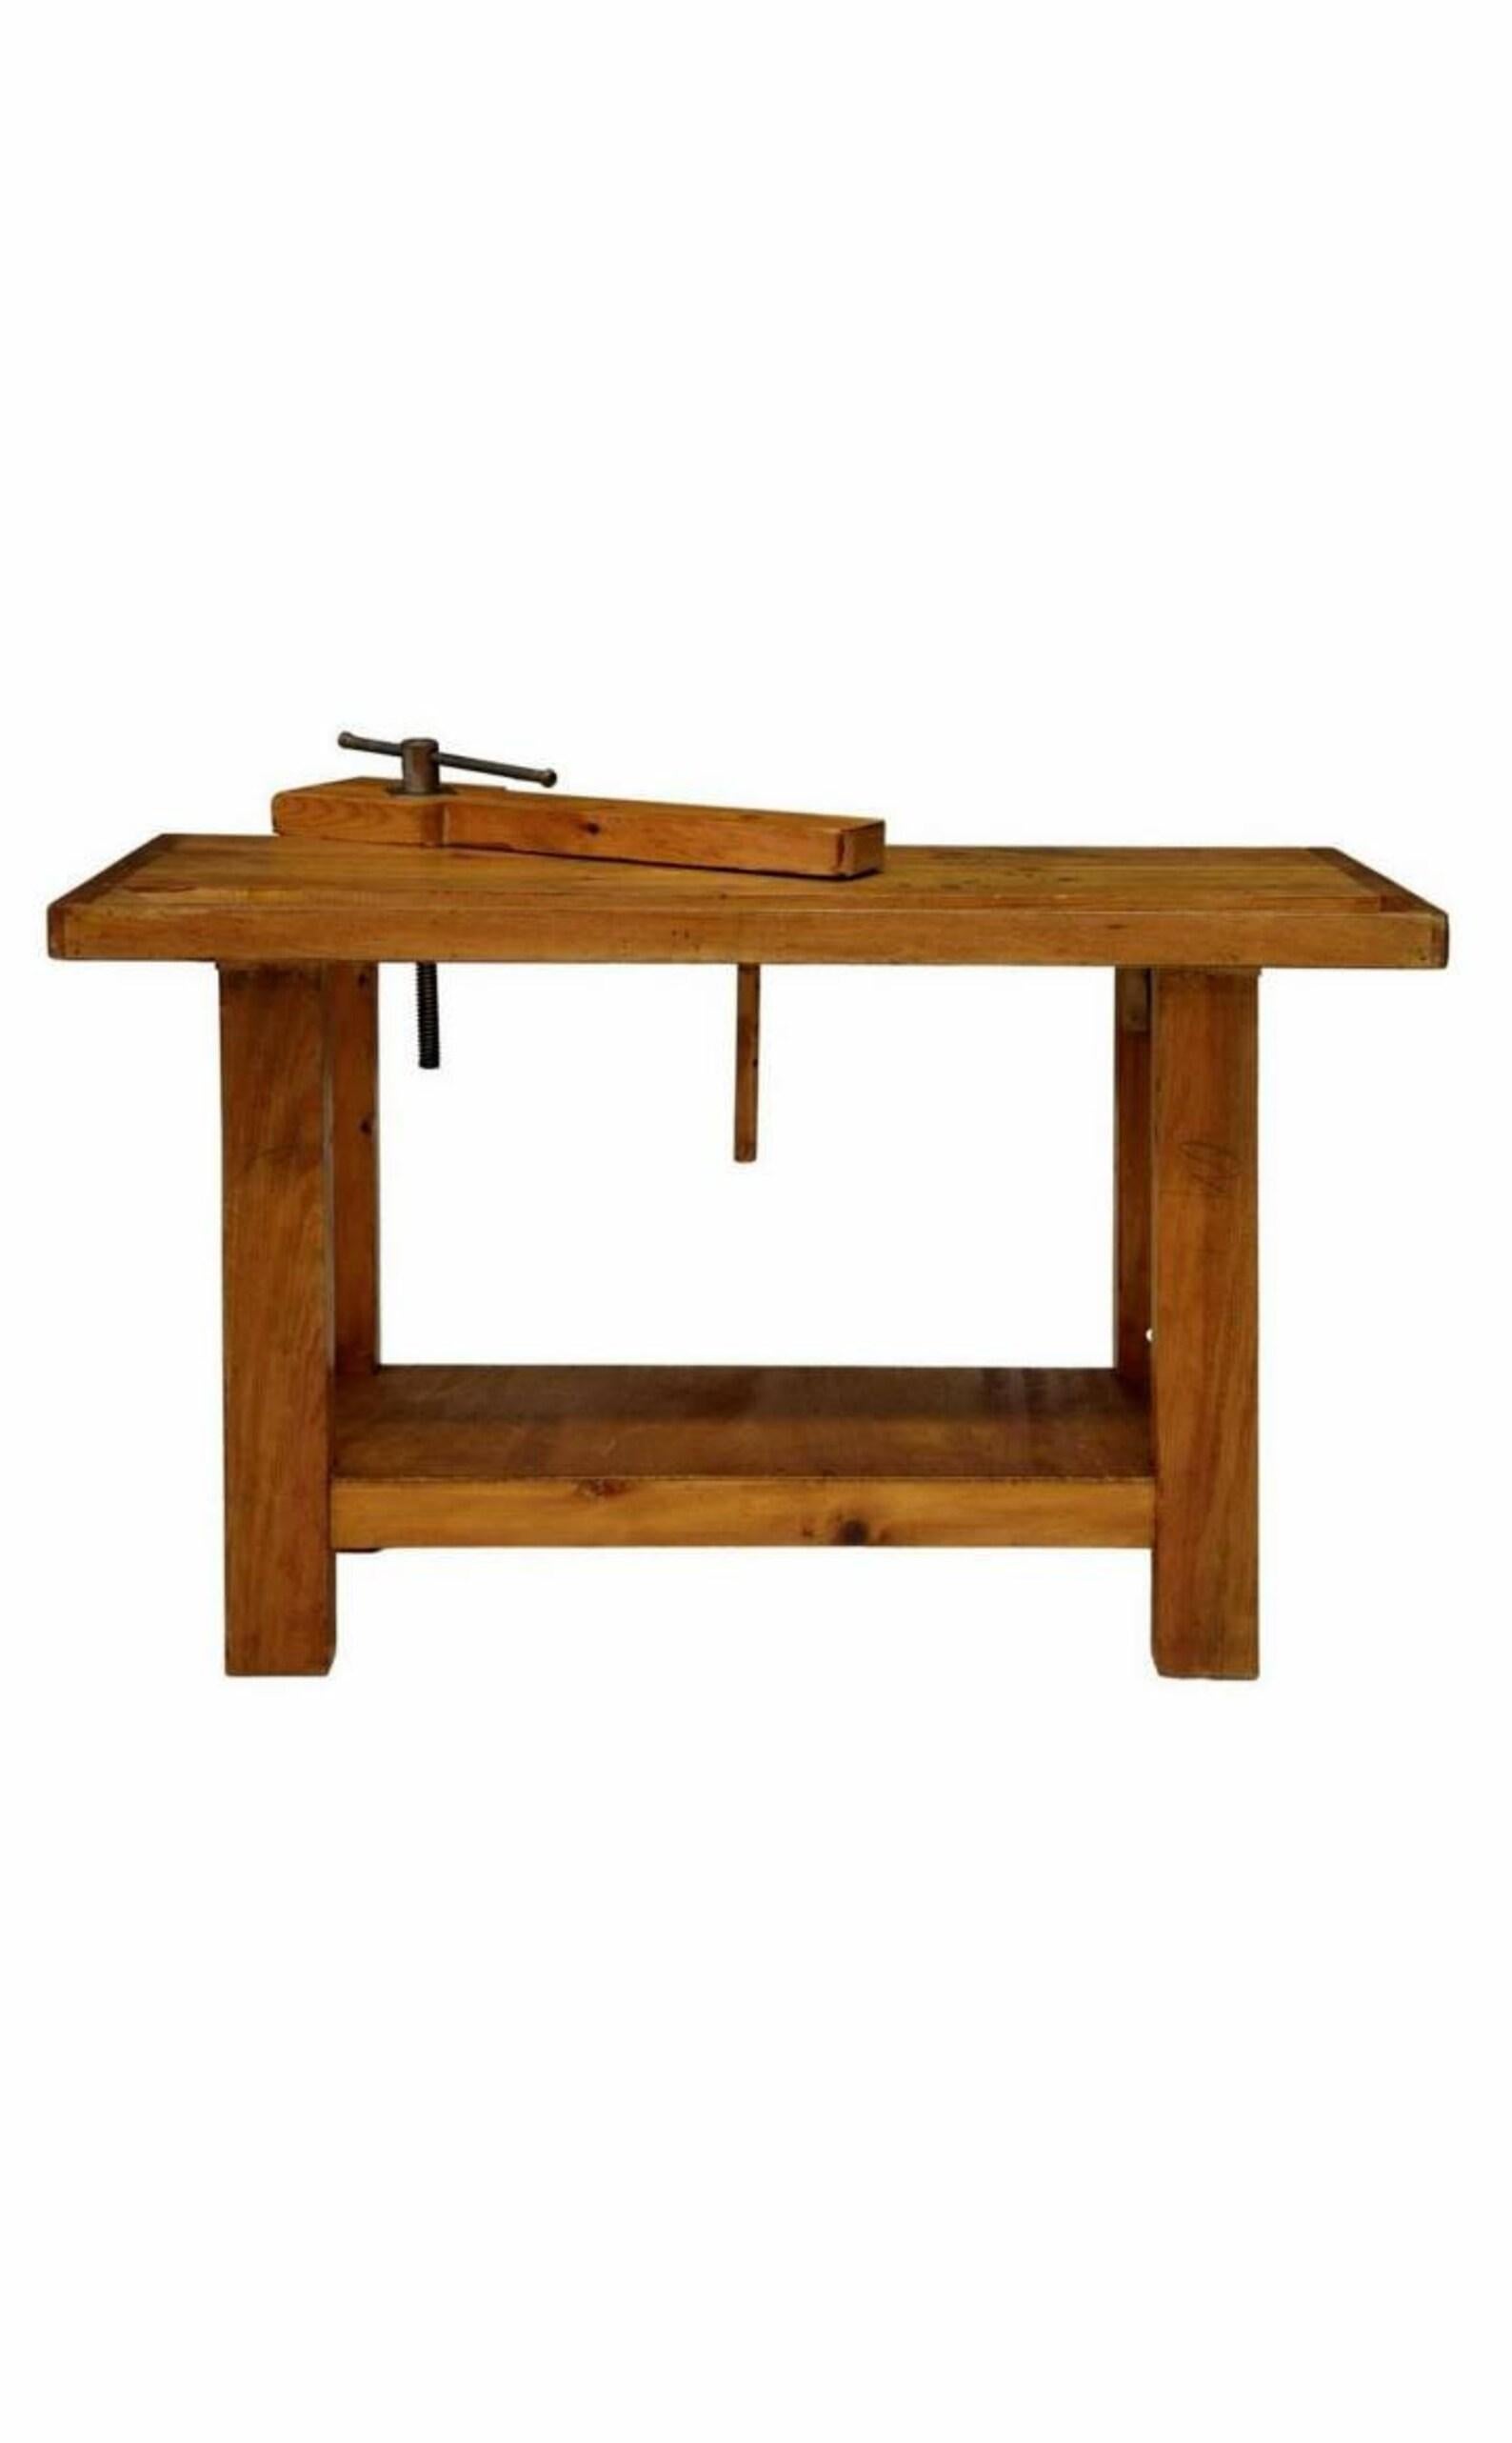 A vintage carpentry woodworking - craftsman's pine workbench.

Dating to the first half of the 20th century, having a thick rectangular solid pine top with desirable overhang and recessed chanel trough, single hand crank vice clamp with heavy iron